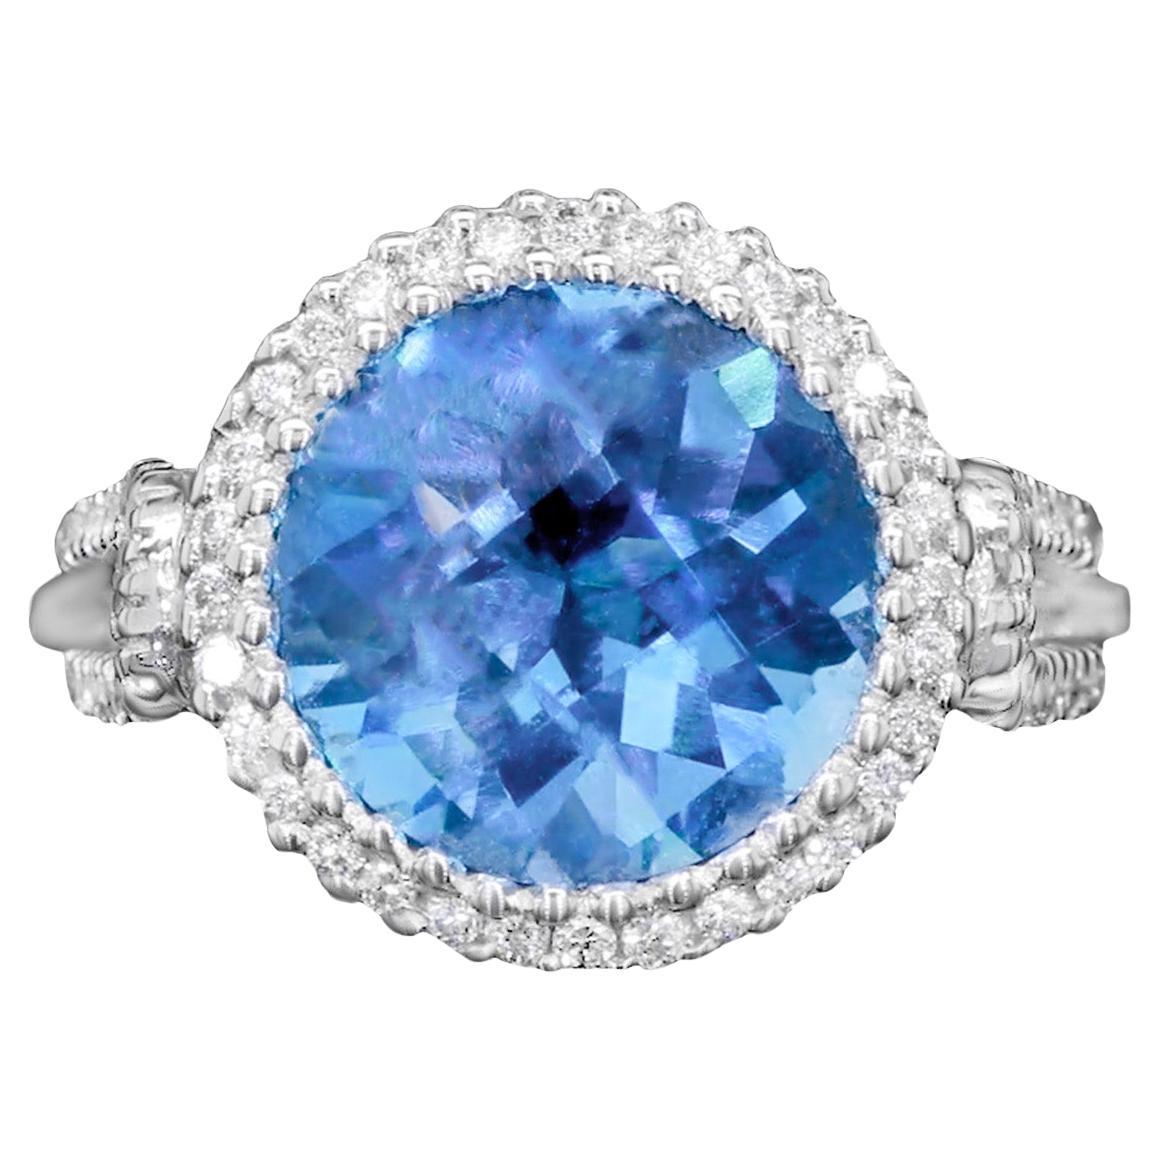 Swiss Blue Topaz Ring With Diamonds 3.79 Carats 18K White Gold